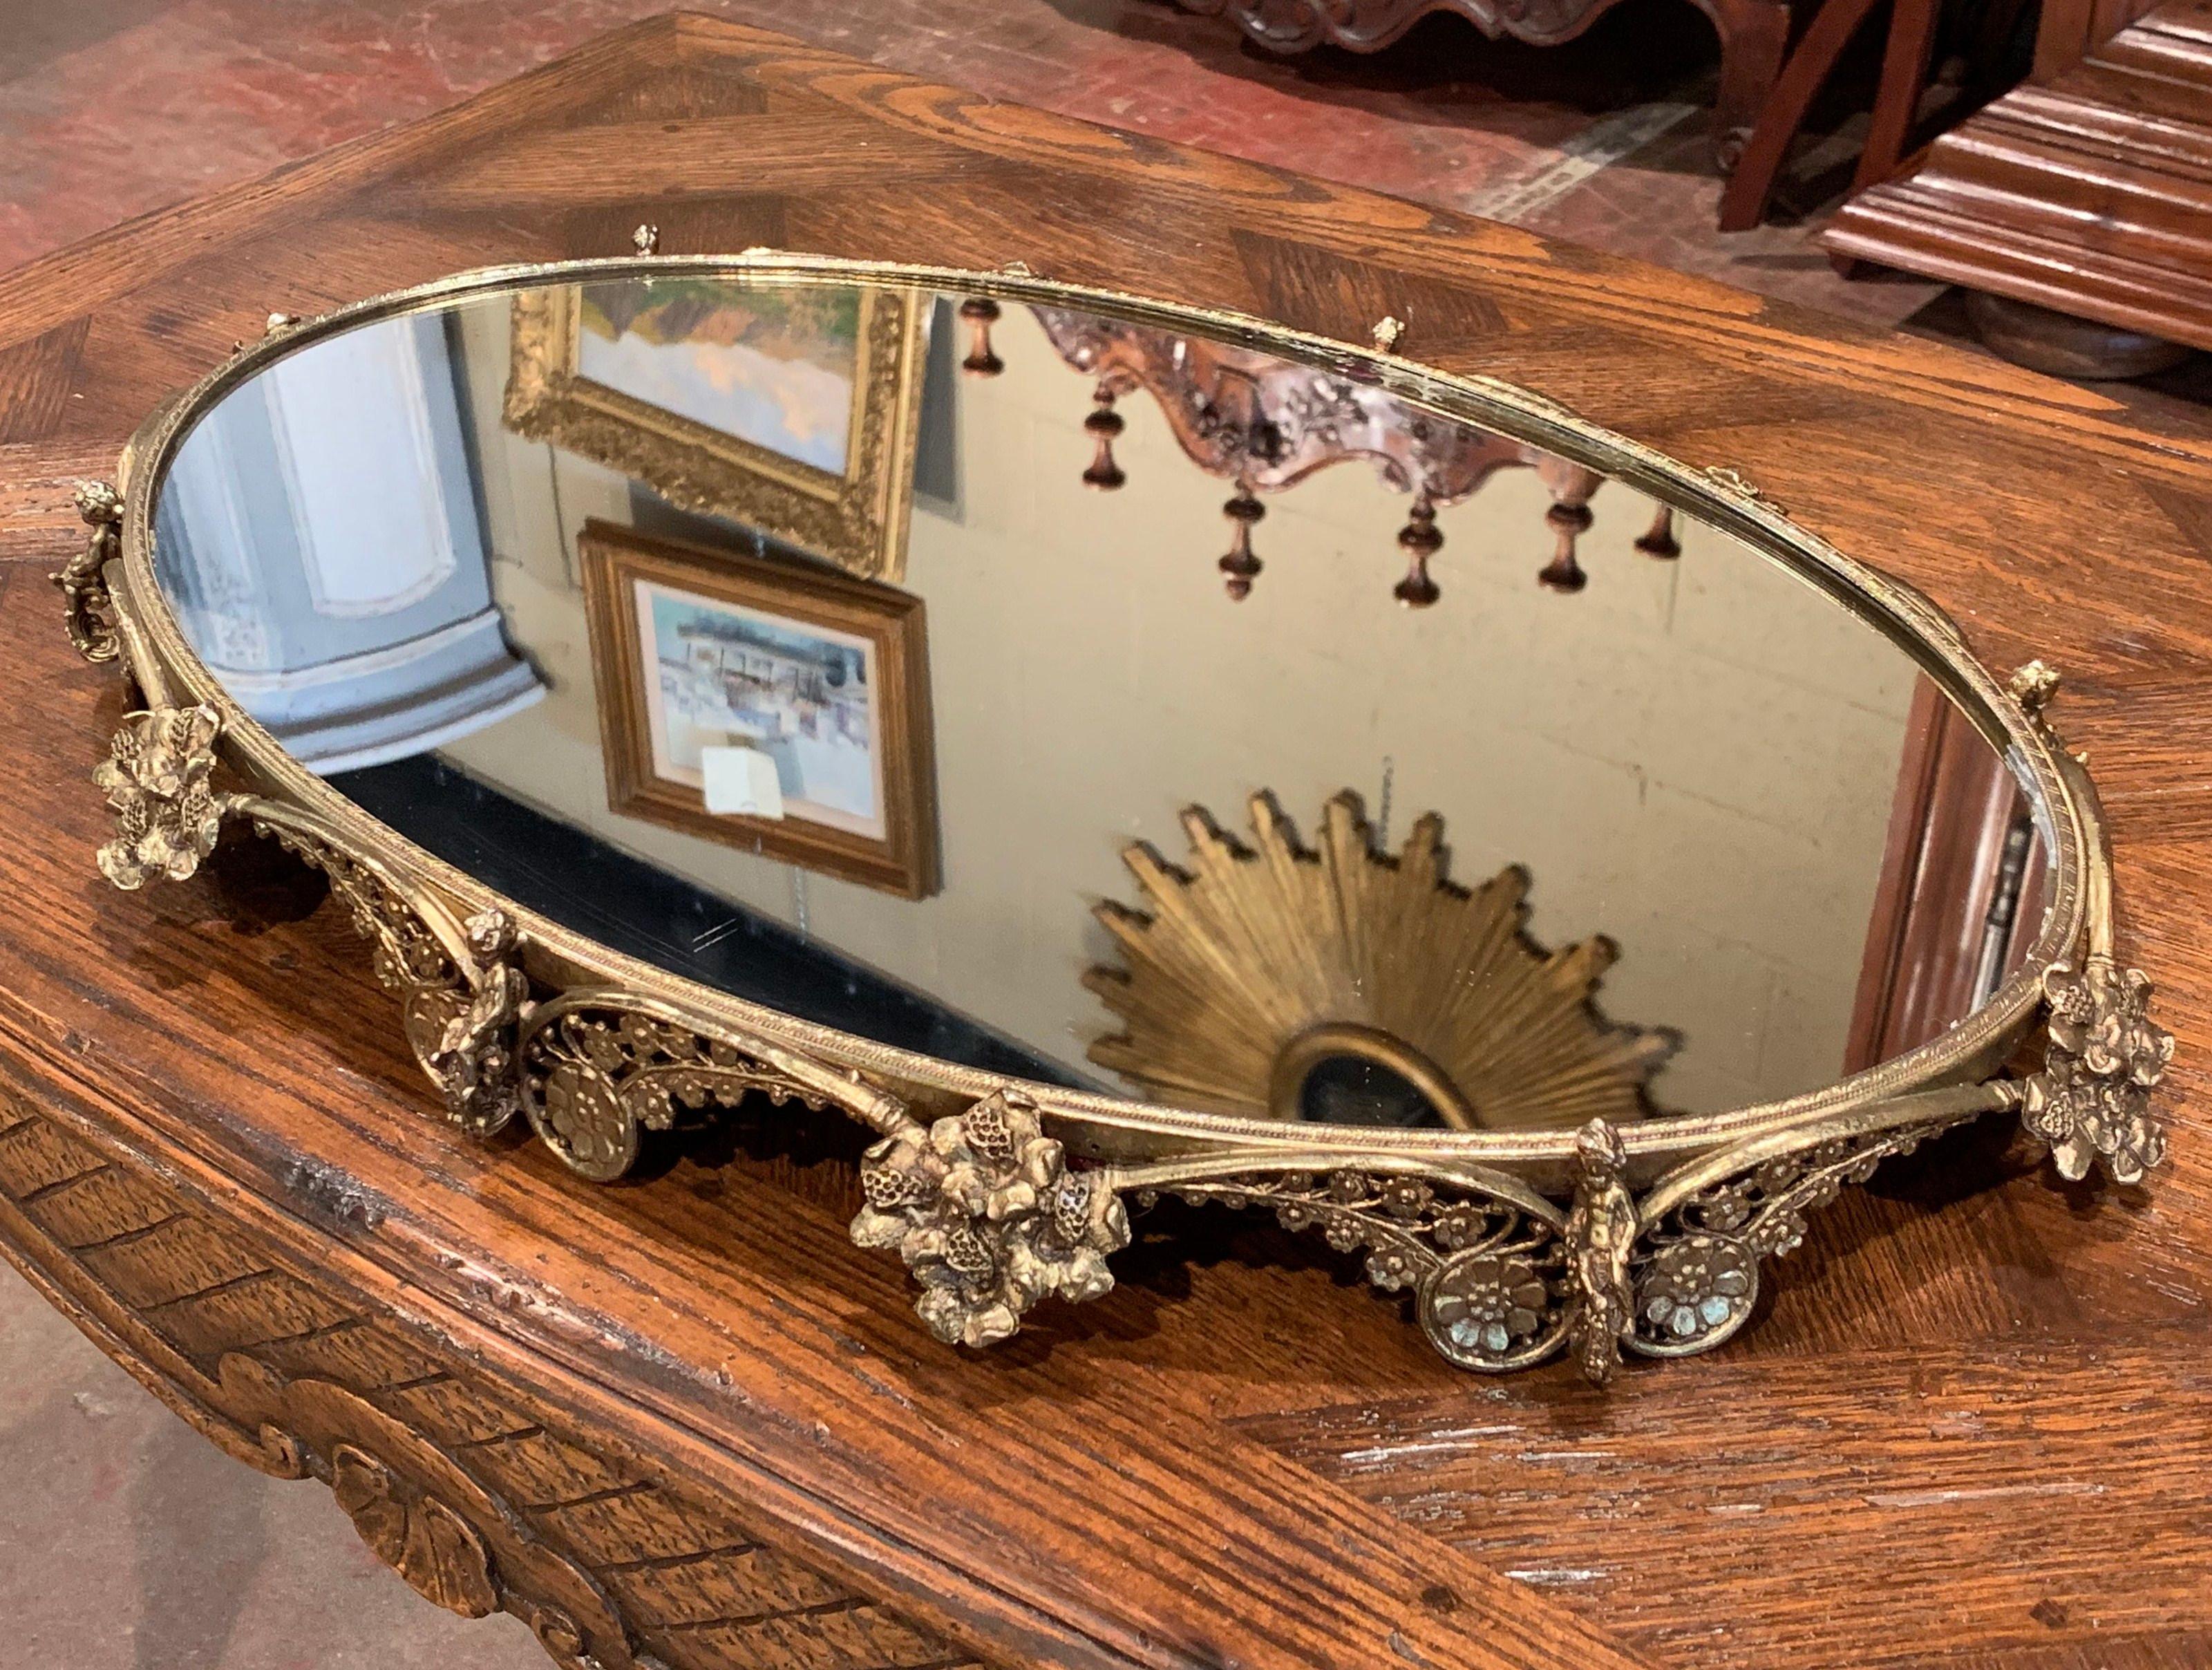 This large, elegant brass centerpiece was crafted in France, circa 1920. The antique, oval table plateau stands on small feet and features a scrolled frame of raised floral and cherub repousse decor. The platter with mirrored surface is in excellent